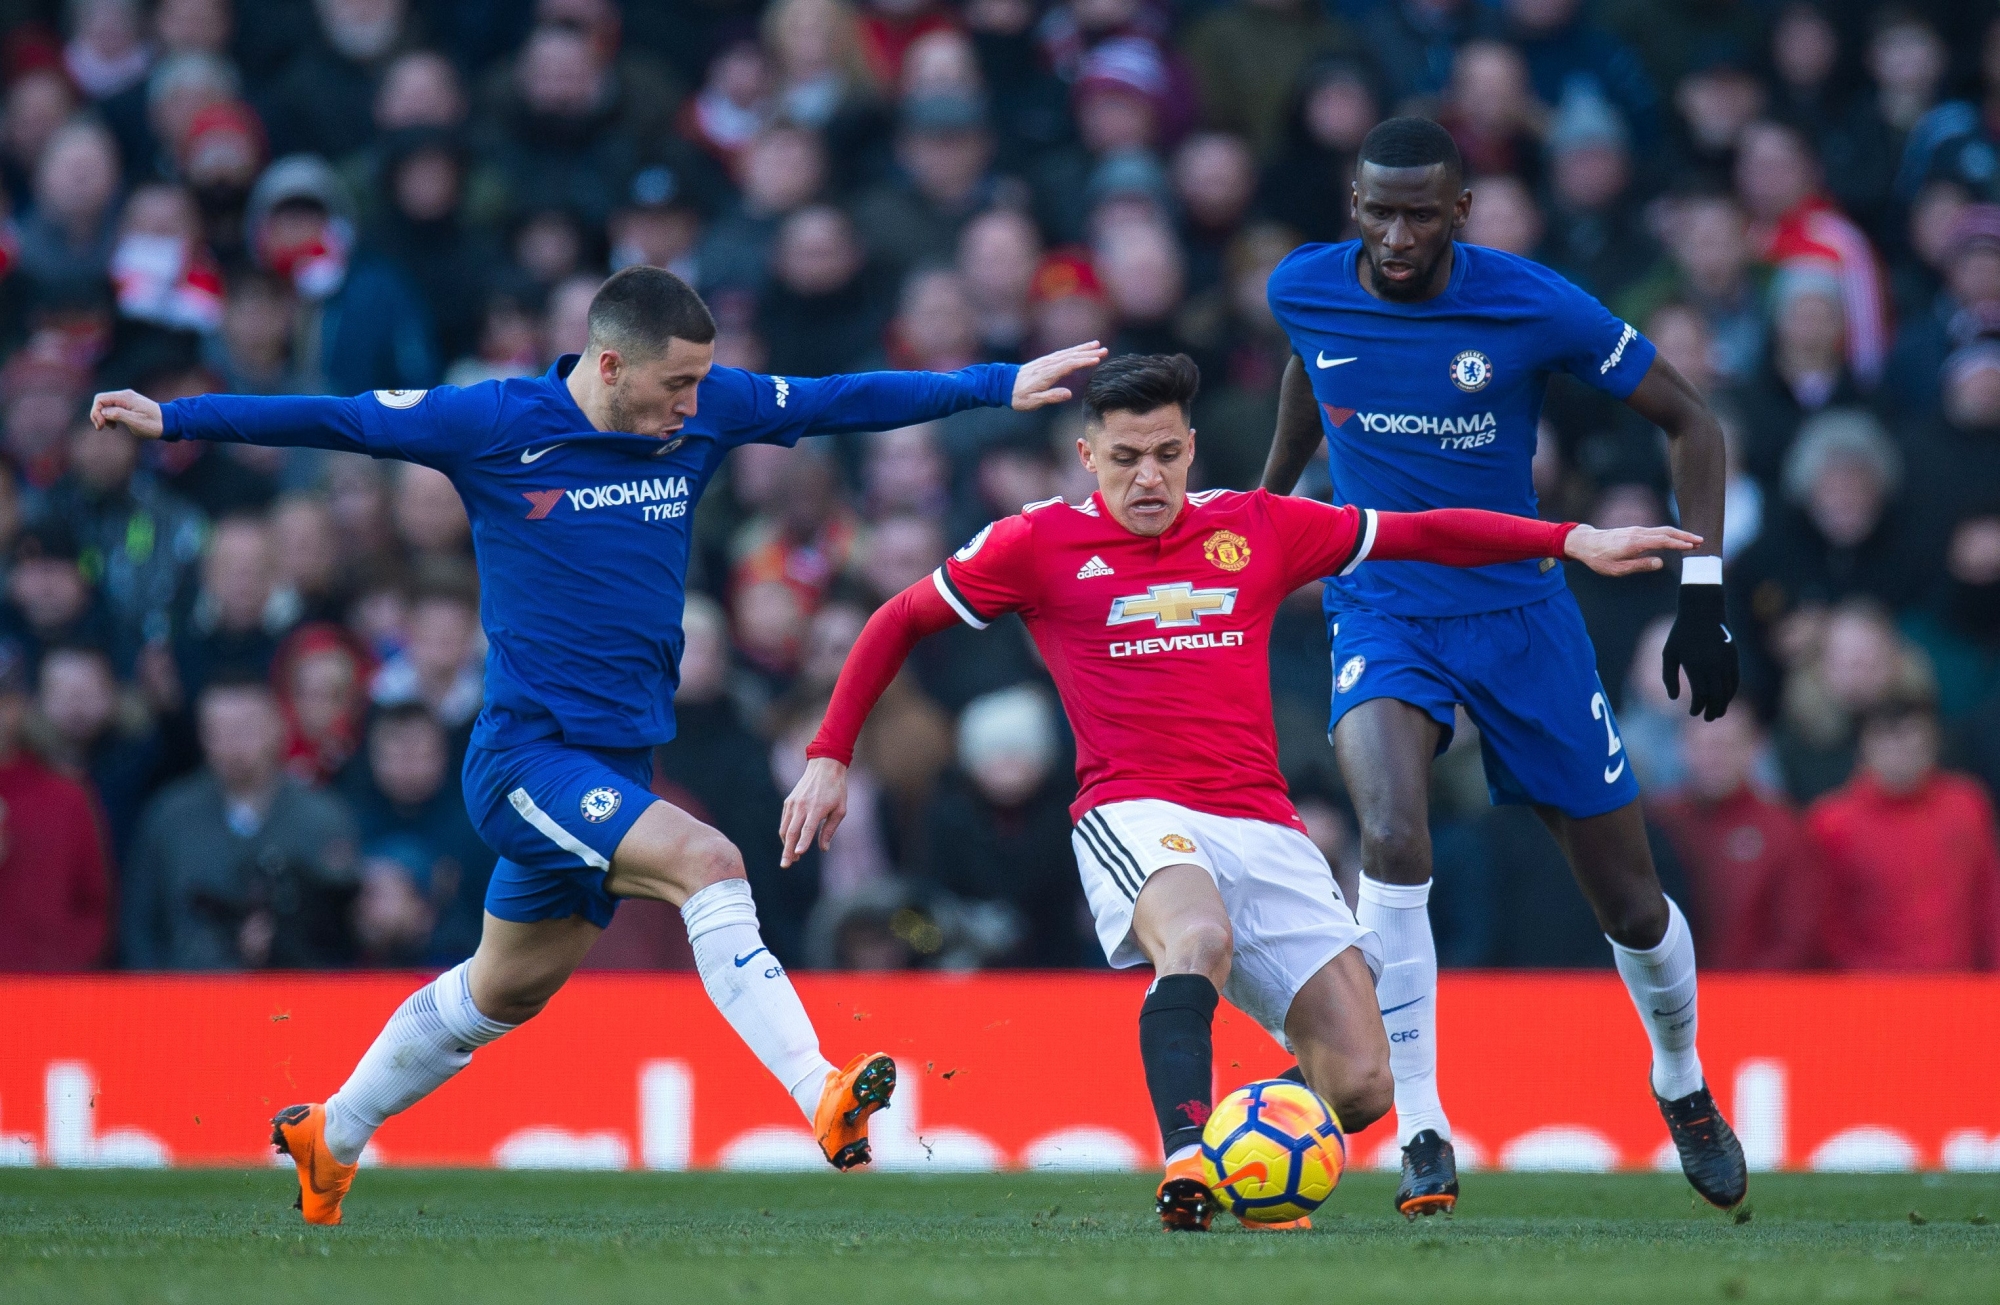 epa06564650 Chelsea's Antonio Ruediger (R) and Eden Hazard (L) in action with Manchester United's Alexis Sanchez (C) during the English Premier League soccer match between Manchester United and Chelsea FC held at Old Trafford, Manchester, Britain, 25 February 2018.  EPA/PETER POWELL EDITORIAL USE ONLY. No use with unauthorized audio, video, data, fixture lists, club/league logos or 'live' services. Online in-match use limited to 75 images, no video emulation. No use in betting, games or single club/league/player publications. BRITAIN SOCCER ENGLISH PREMIER LEAGUE